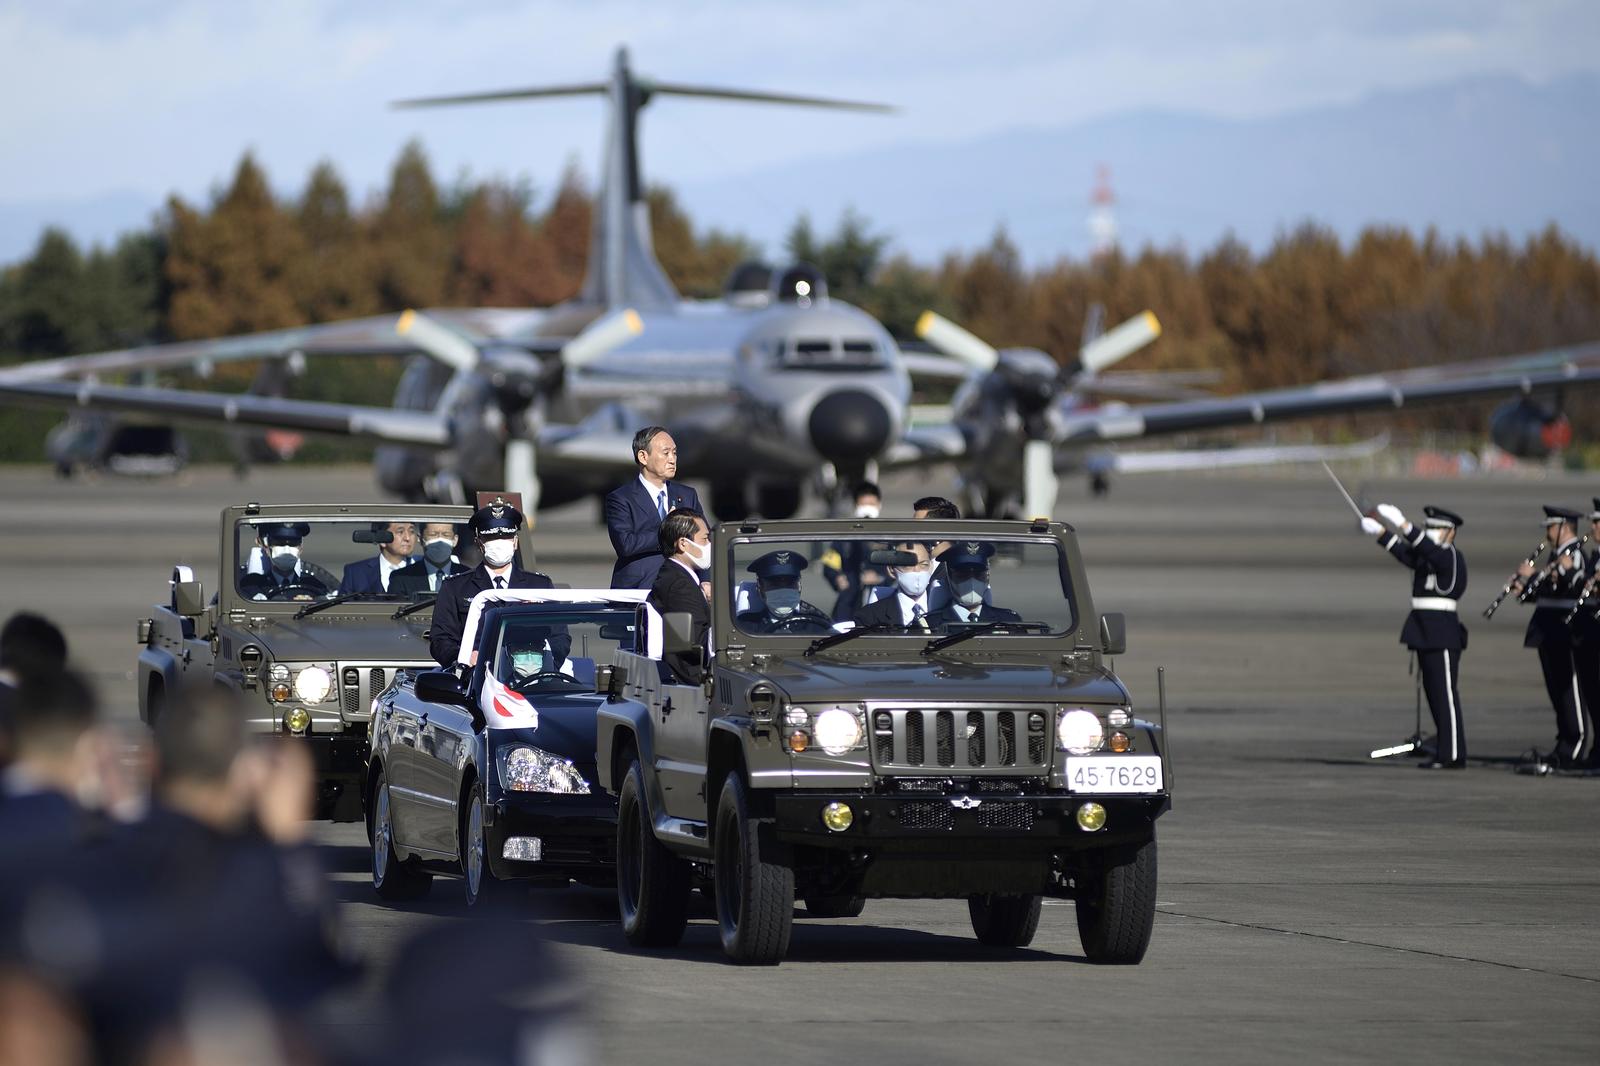 Japan sets record $52 billion military budget with stealth jets, long-range missiles